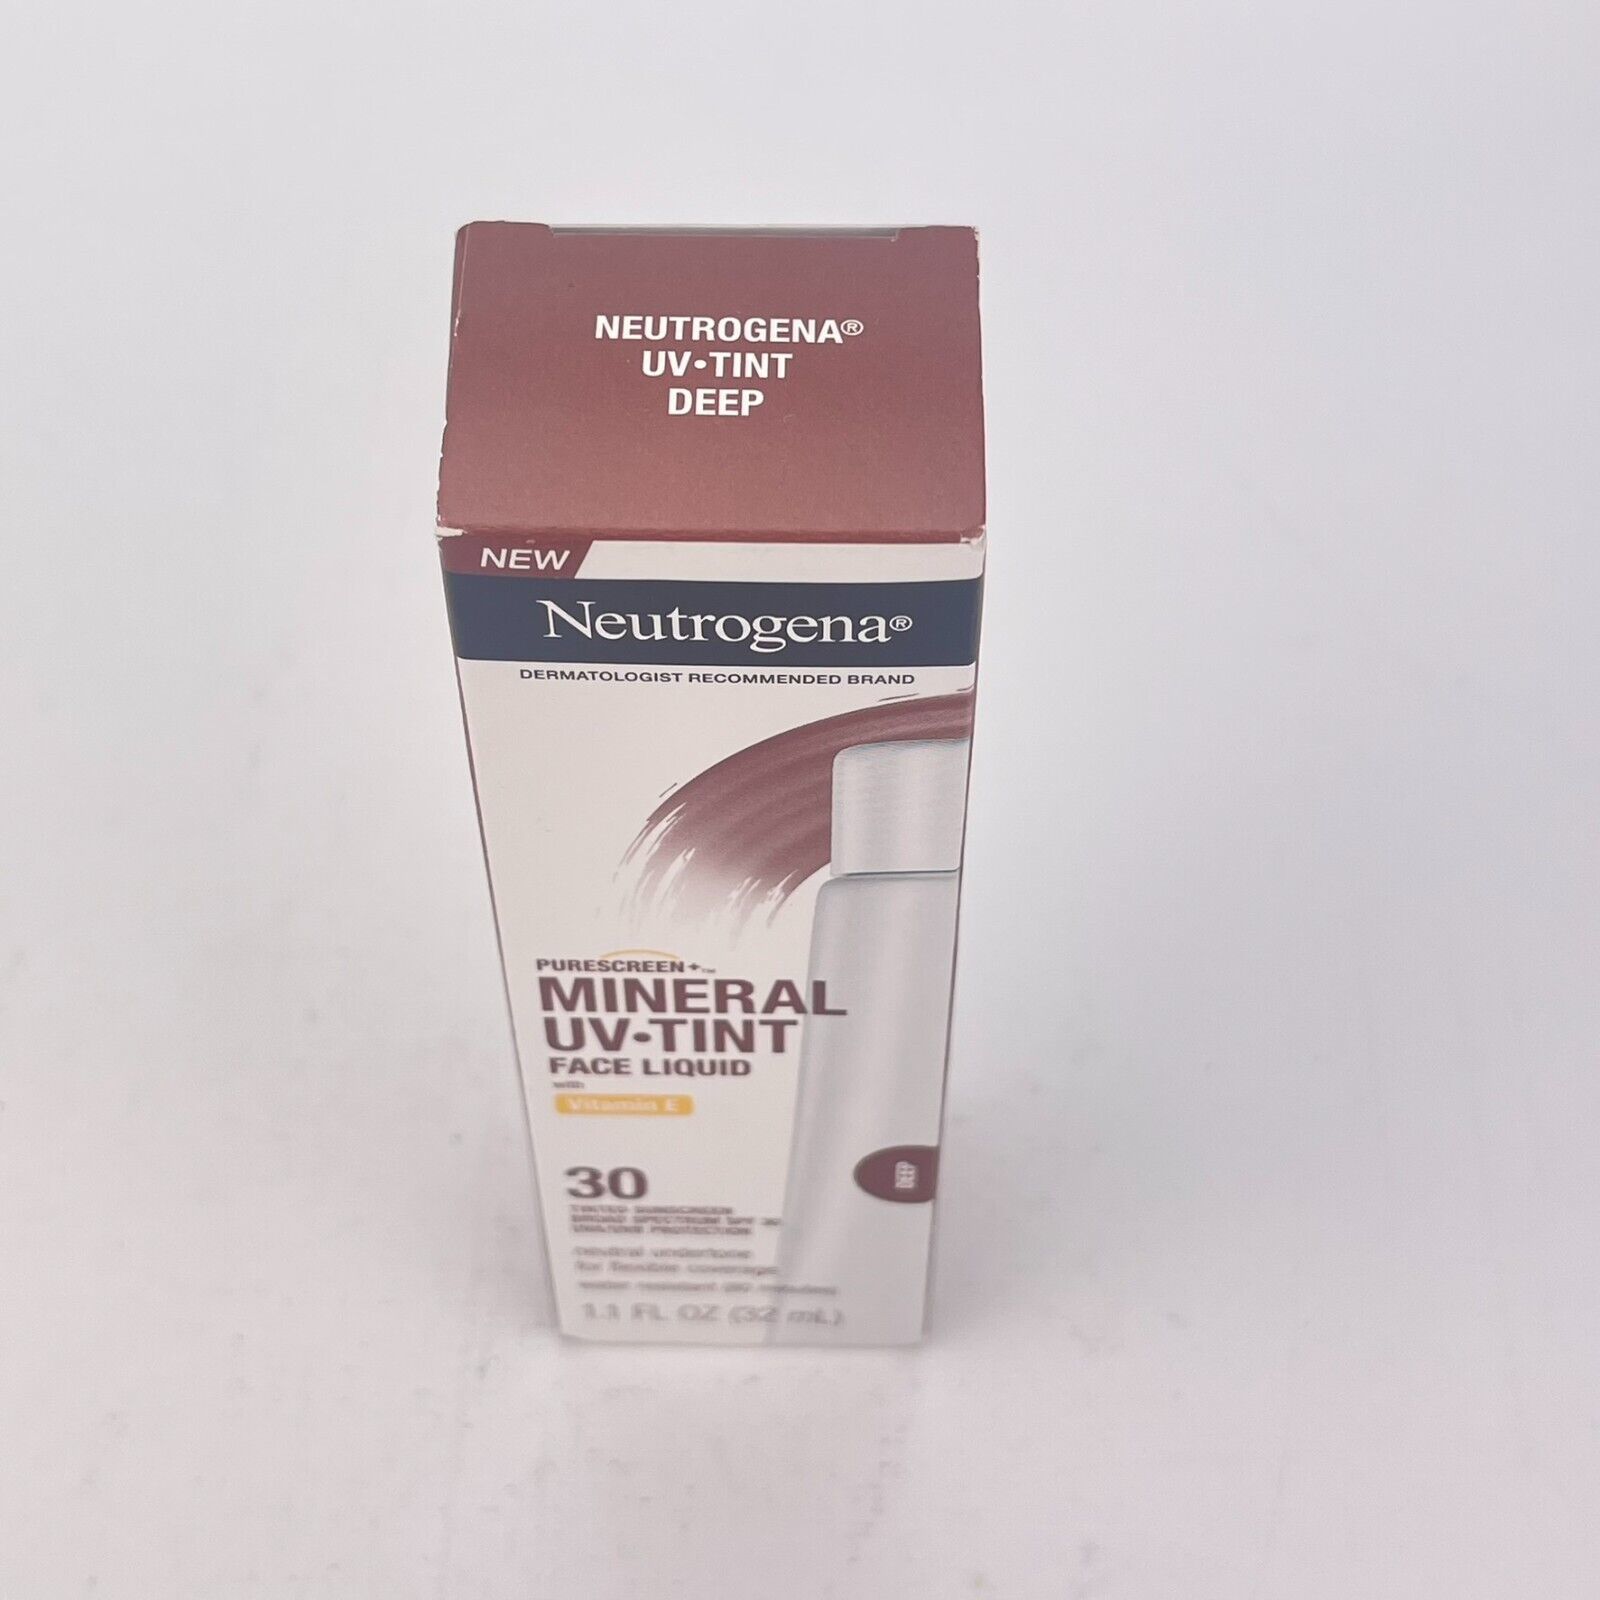 Primary image for Neutrogena Purescreen Mineral UV Tint Face Liquid Sunscreen Deep BB9/24 Lot of 2